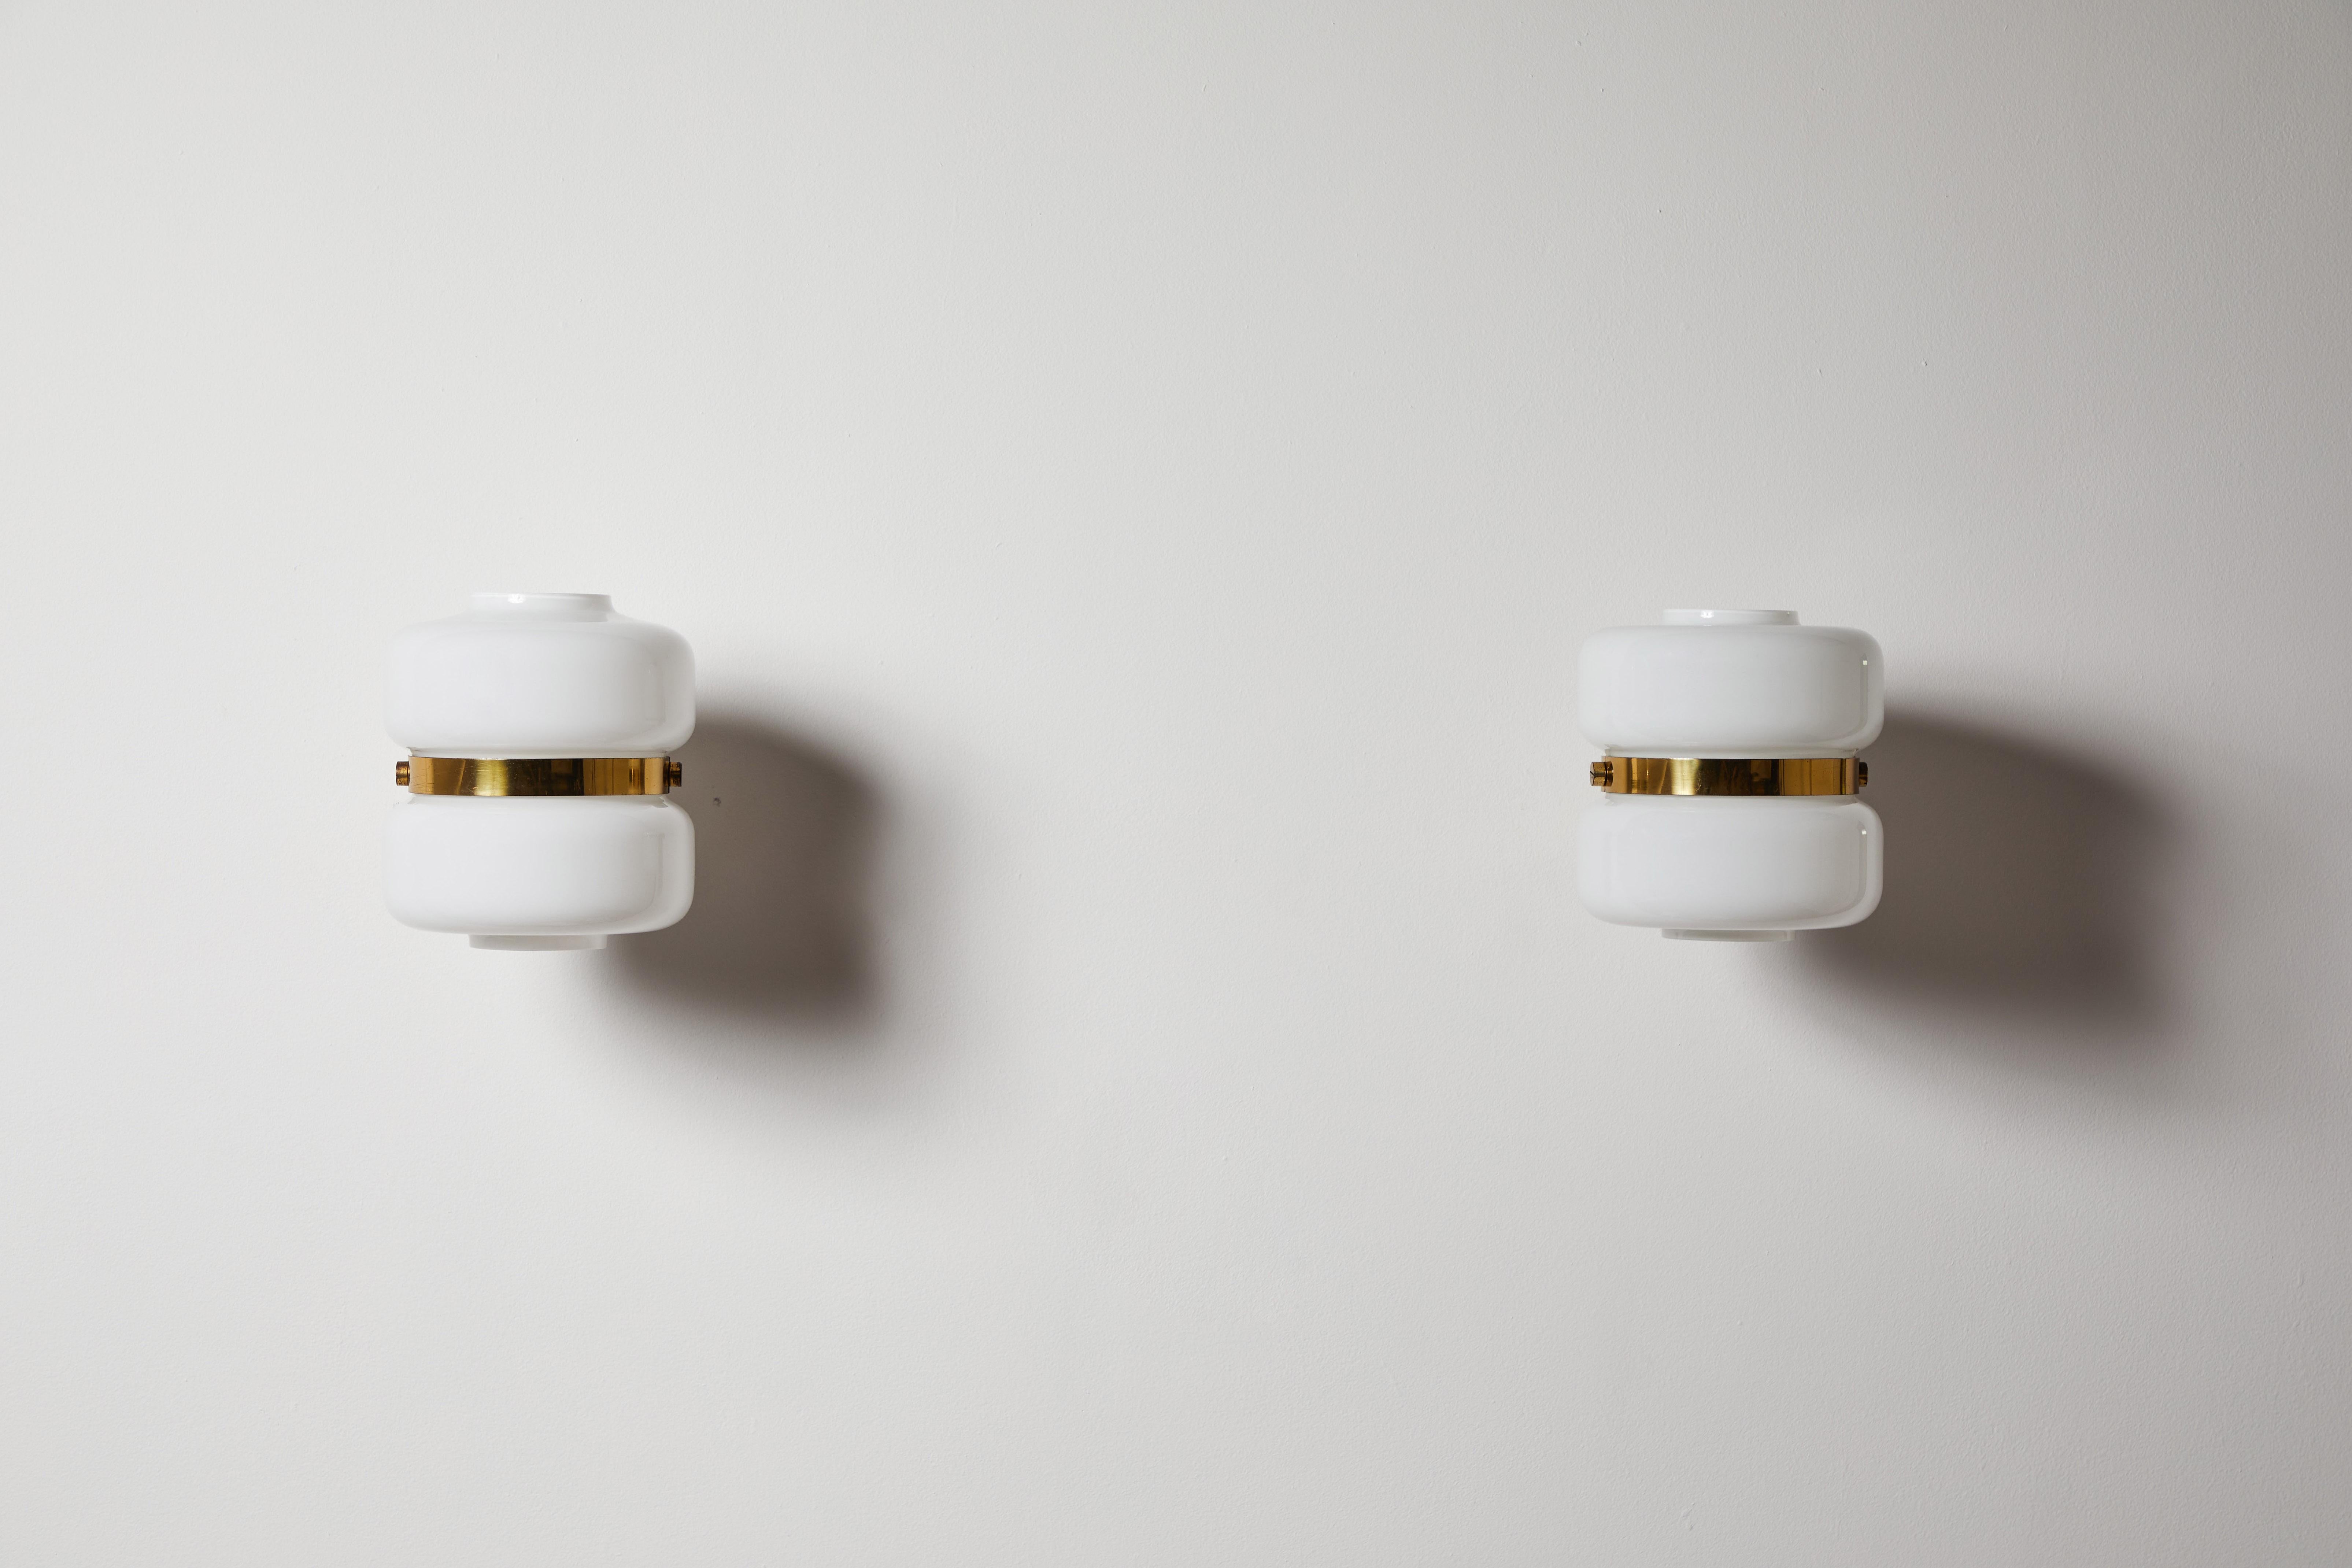 Mid-20th Century Pair of Sconces by Architect Pier Fausto Baggati Valsecci fro Andrasteia Milano